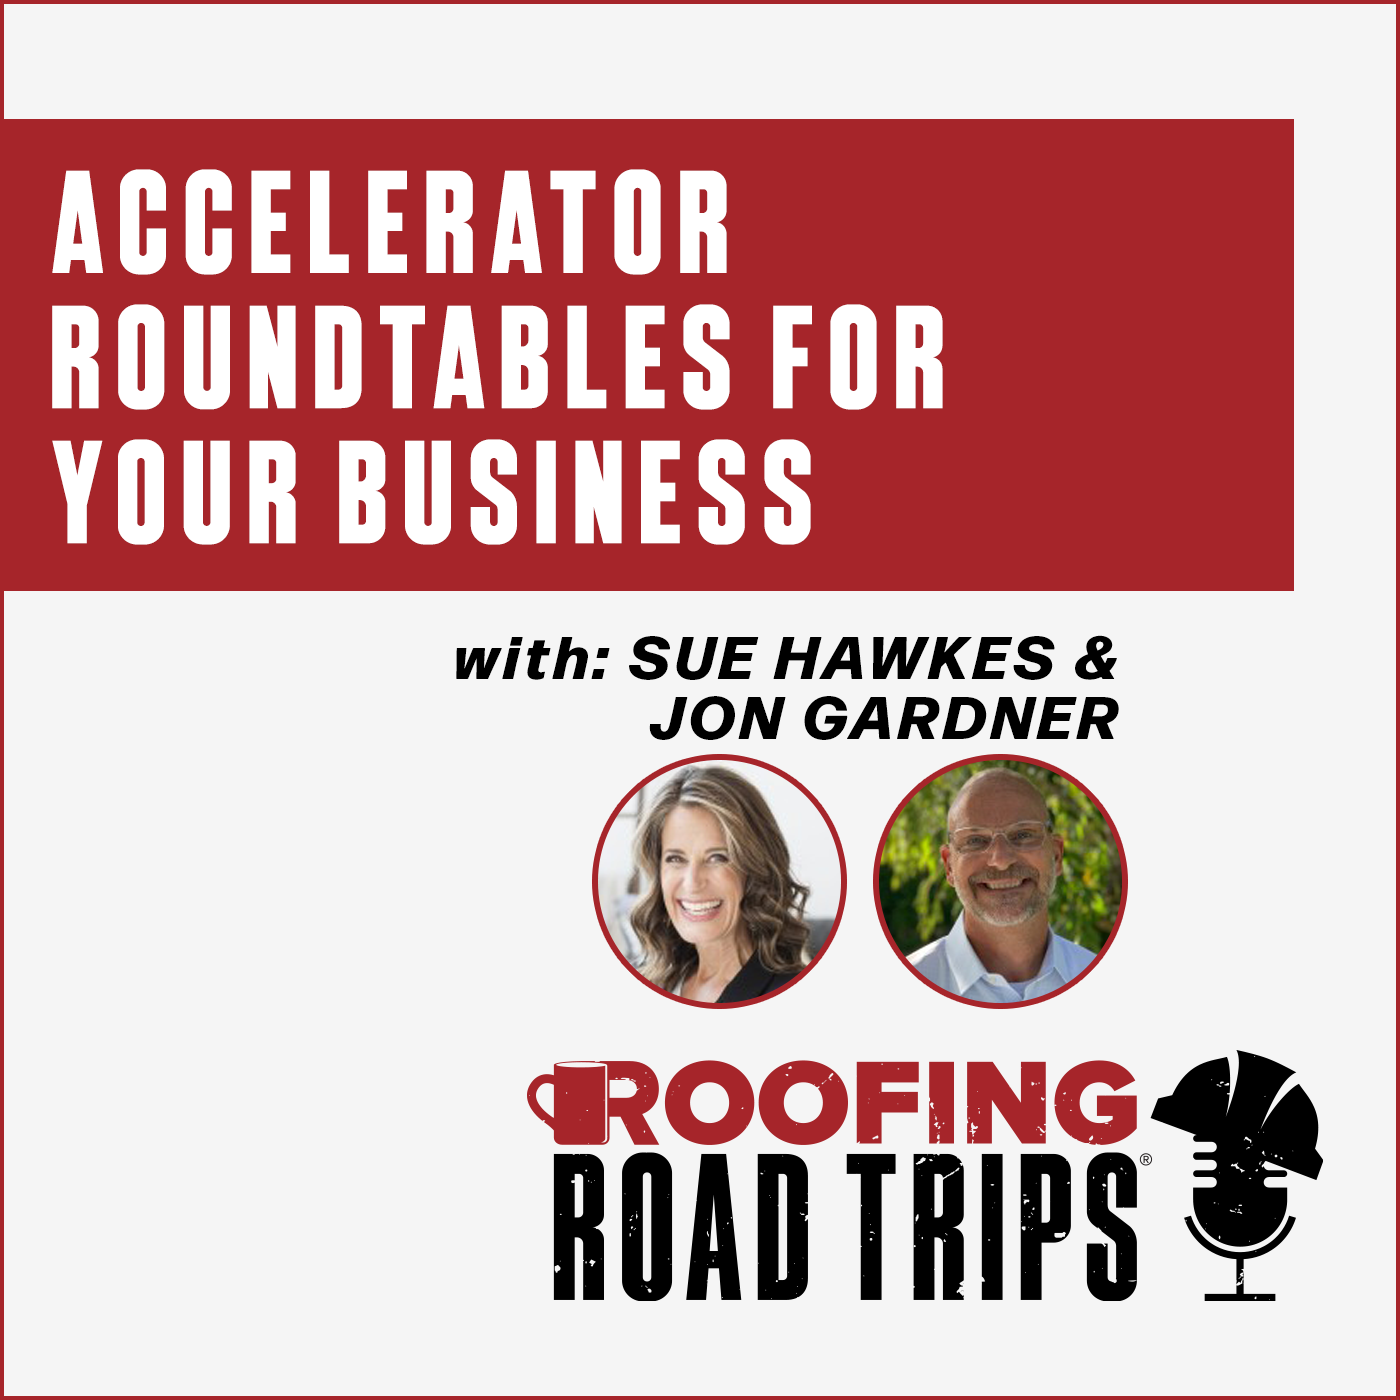 Sue Hawkes & John Gardner - Accelerator Roundtables for Your Business